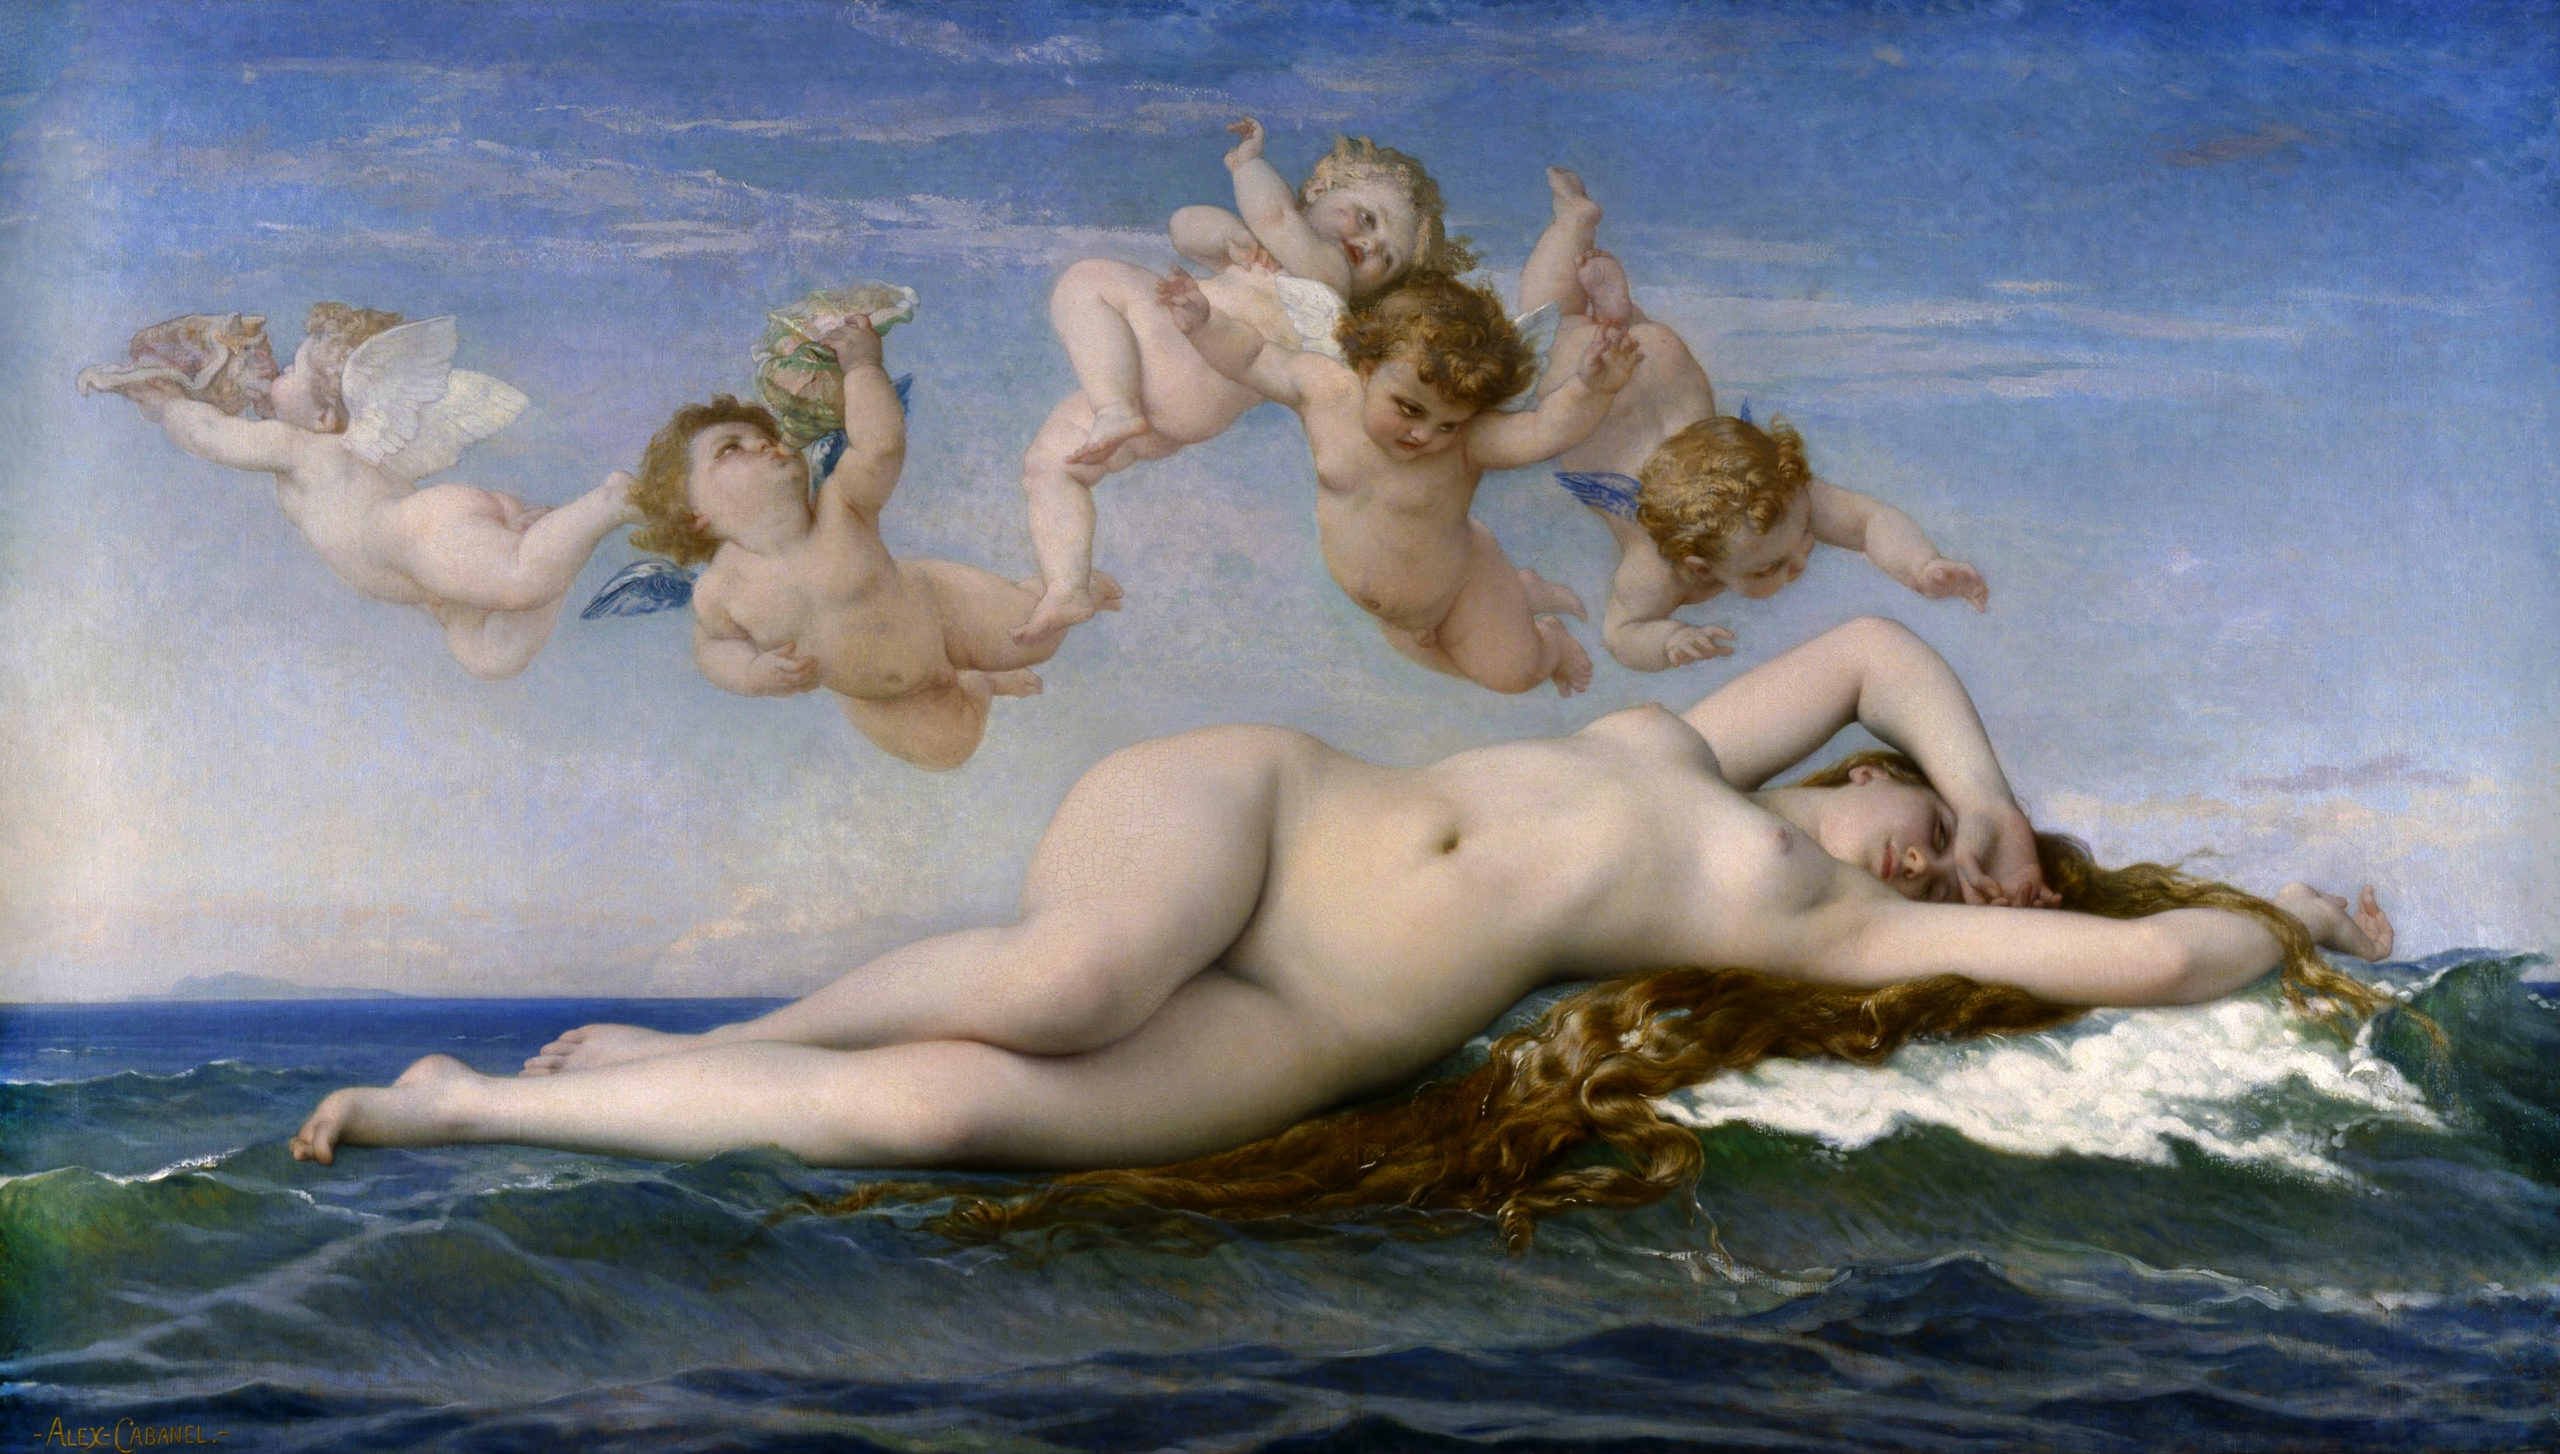 Alexandre Cabanel, The Birth of Venus, 1863, oil on canvas, 130 x 225 cm (Musée d'Orsay)